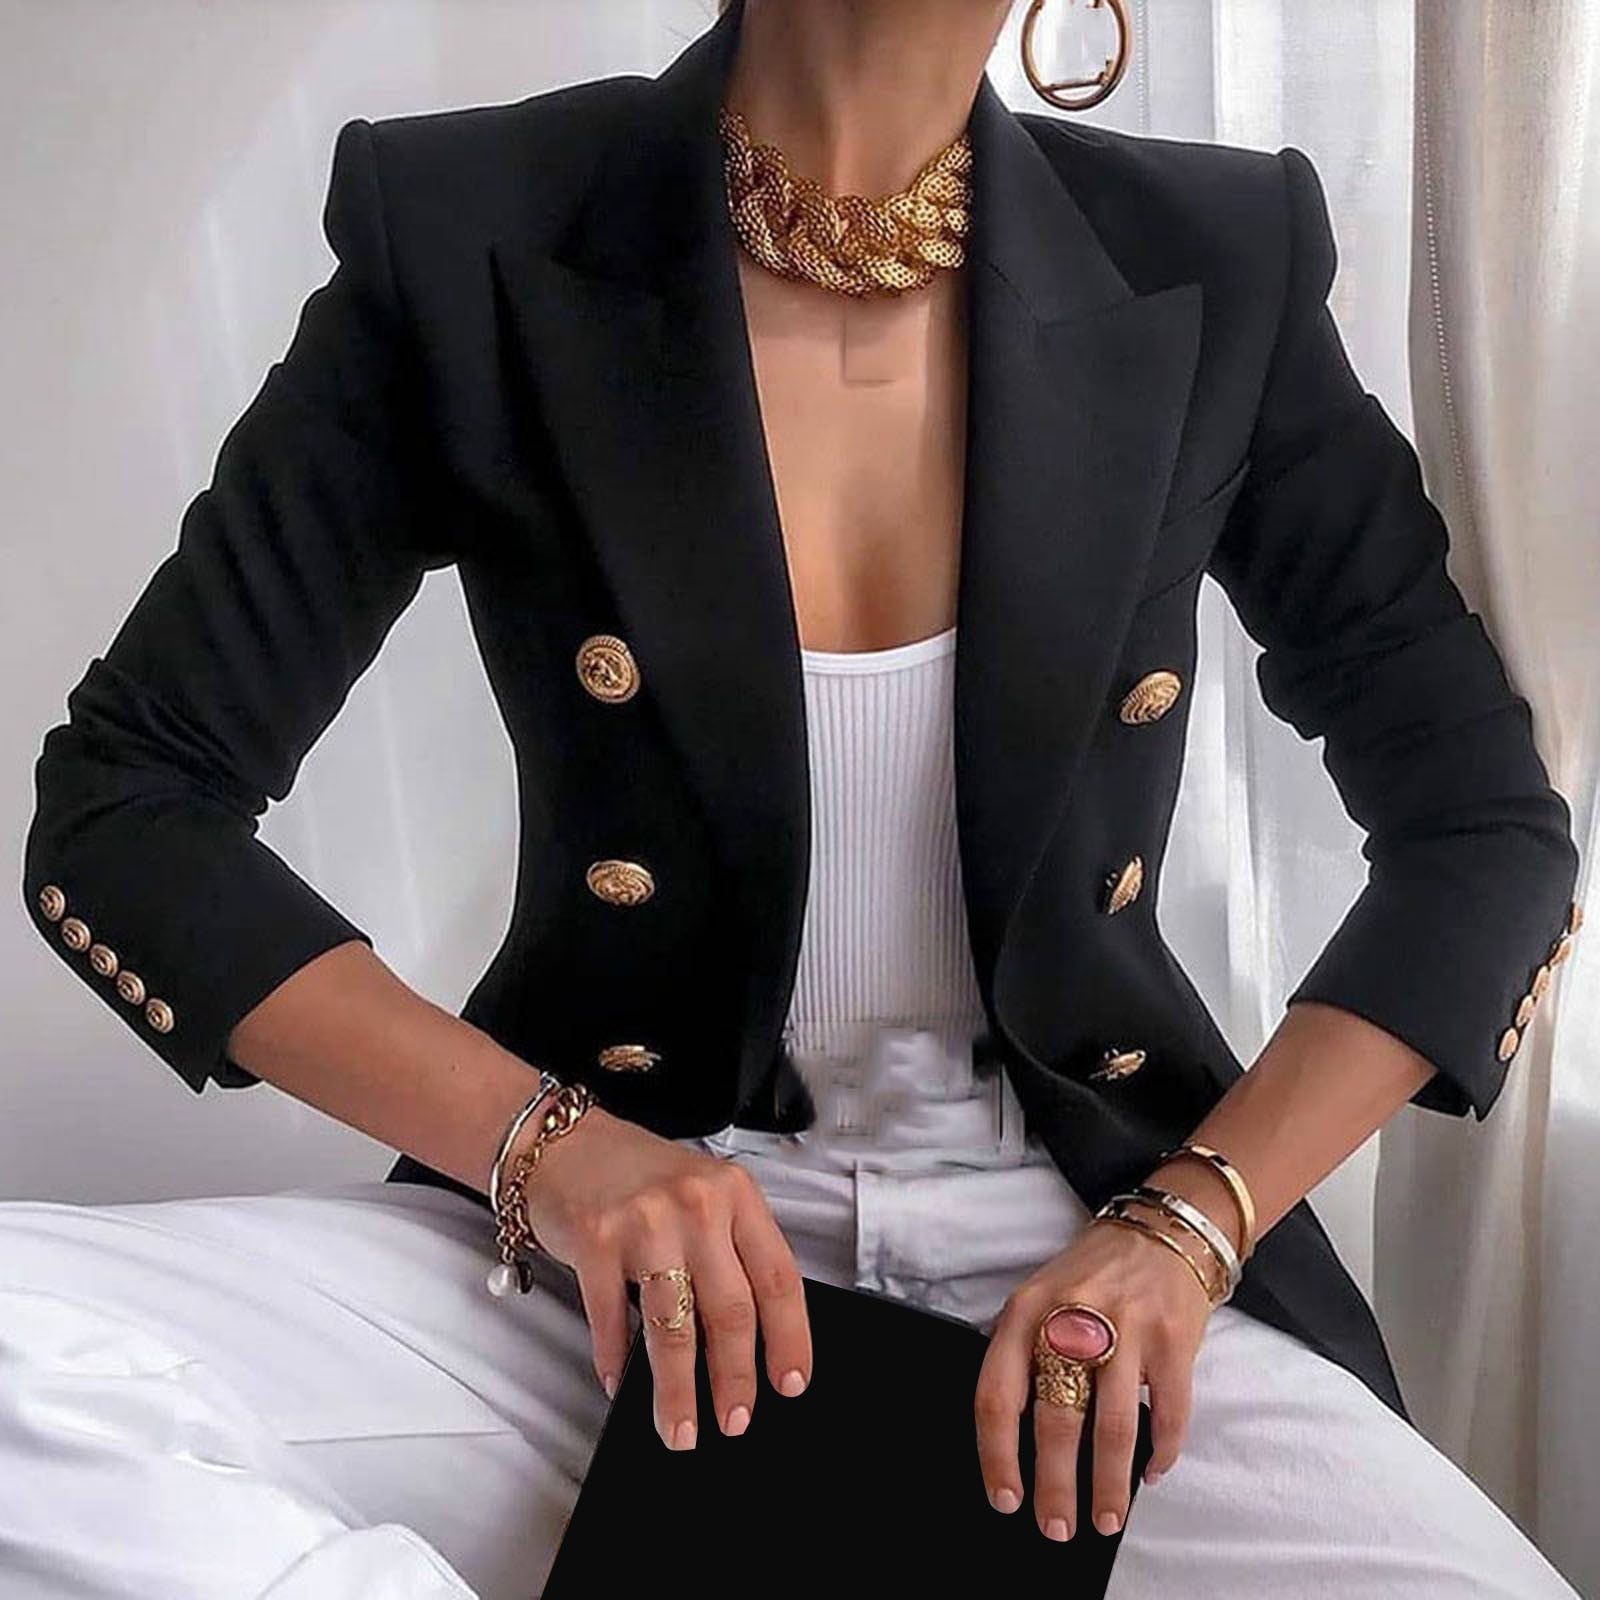 Ecqkame Women's Blazer Jackets Elegant Business Office Work Lady Solid  Button Suit Jacket Coat Outwear with Pocketed Navy M 